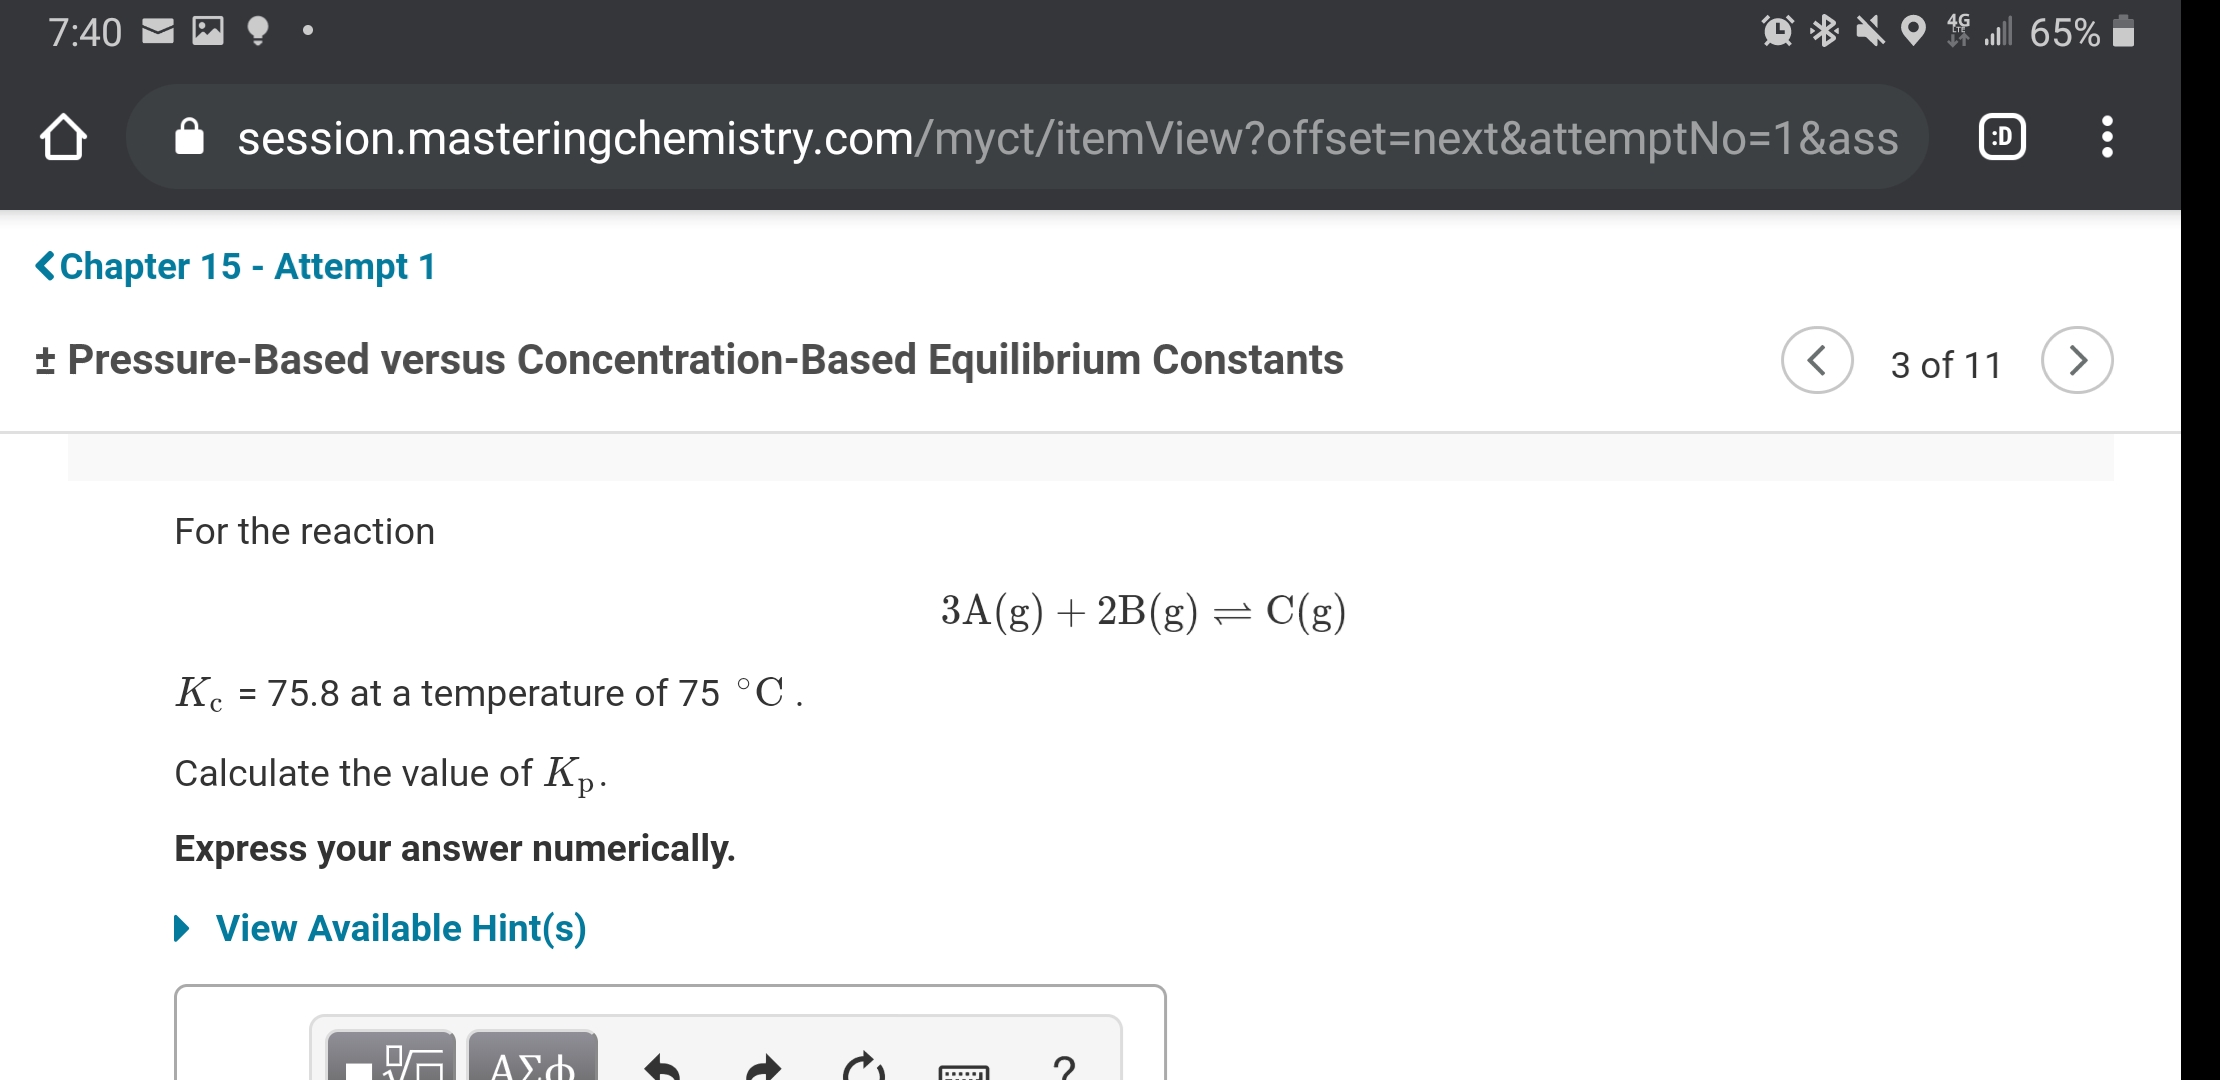 7:40
session.masteringchemistry.com/myct/itemView?offset=next&attemptNo=1&ass
:D
<Chapter 15 - Attempt 1
+ Pressure-Based versus Concentration-Based Equilibrium Constants
3 of 11
For the reaction
3A(g) + 2B(g) = C(g)
K. = 75.8 at a temperature of 75 °C.
Calculate the value of Kp.
Express your answer numerically.
• View Available Hint(s)
ΑΣ
